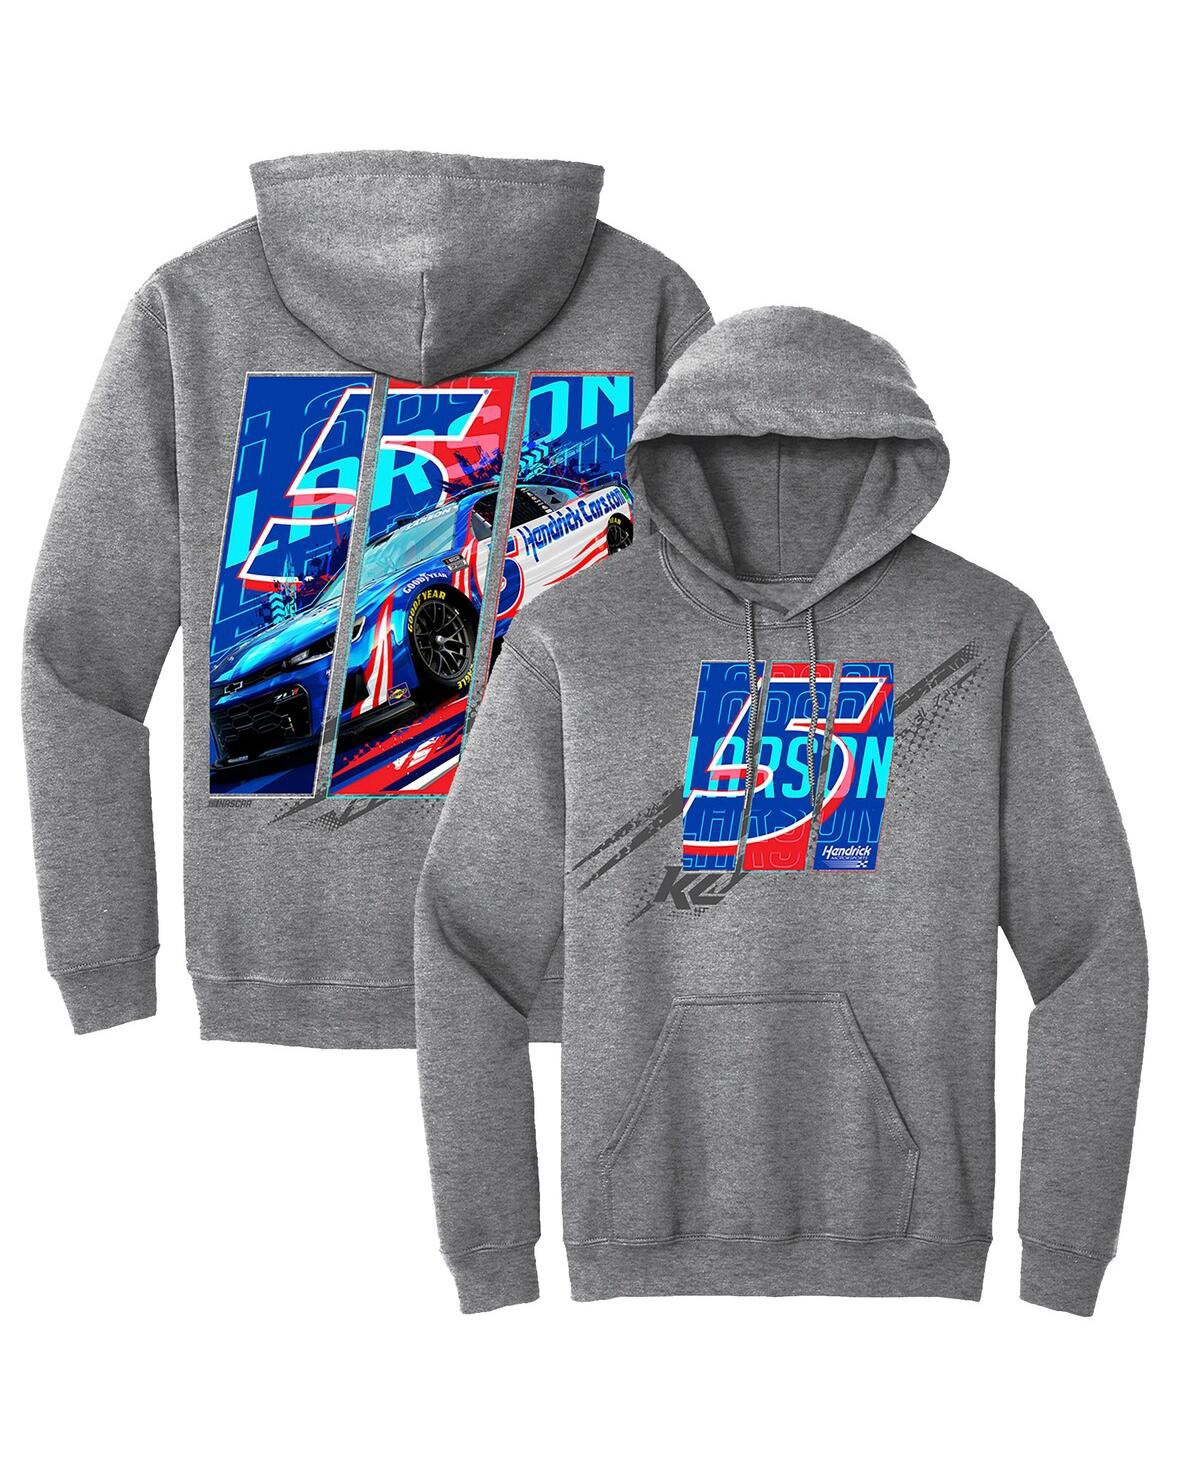 Men's Hendrick Motorsports Team Collection Heather Charcoal Kyle Larson Pullover Hoodie - Heather Charcoal